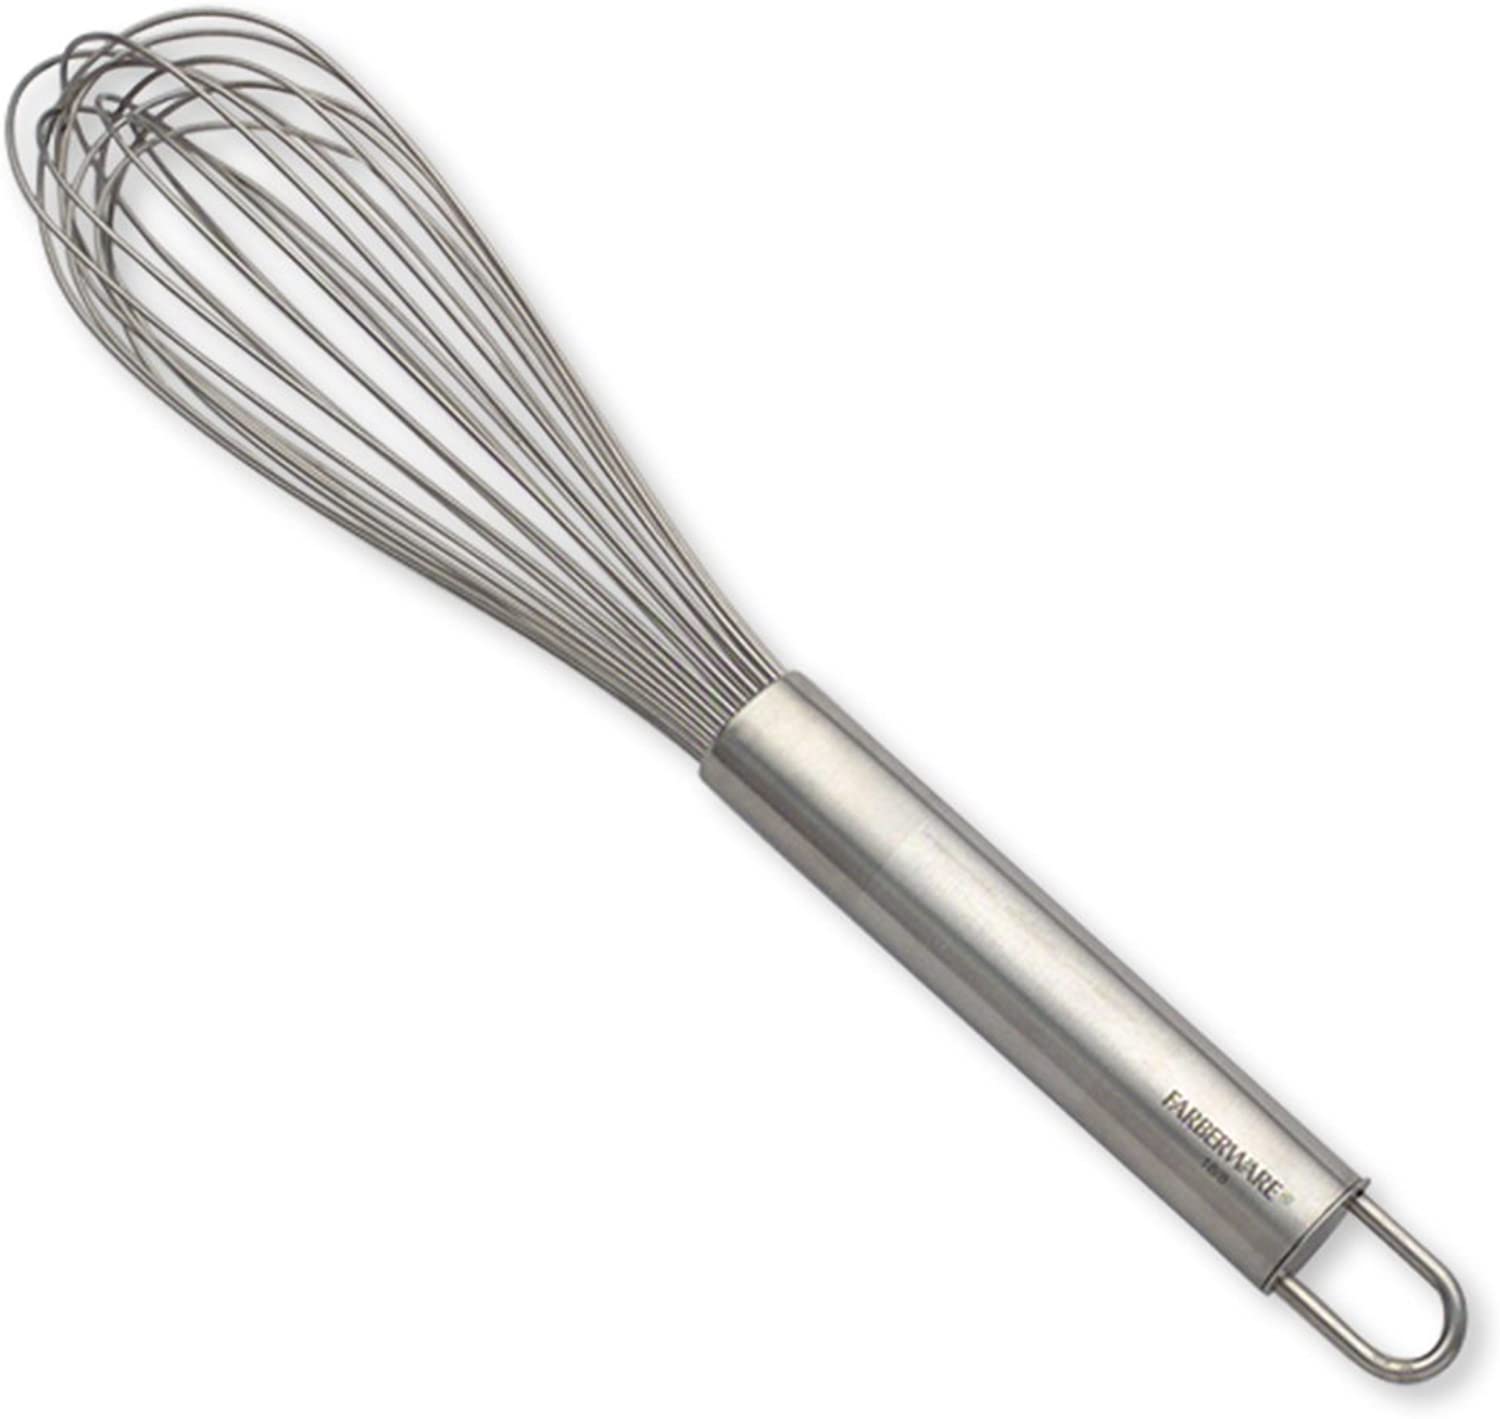 Choice 18 Stainless Steel French Whip / Whisk